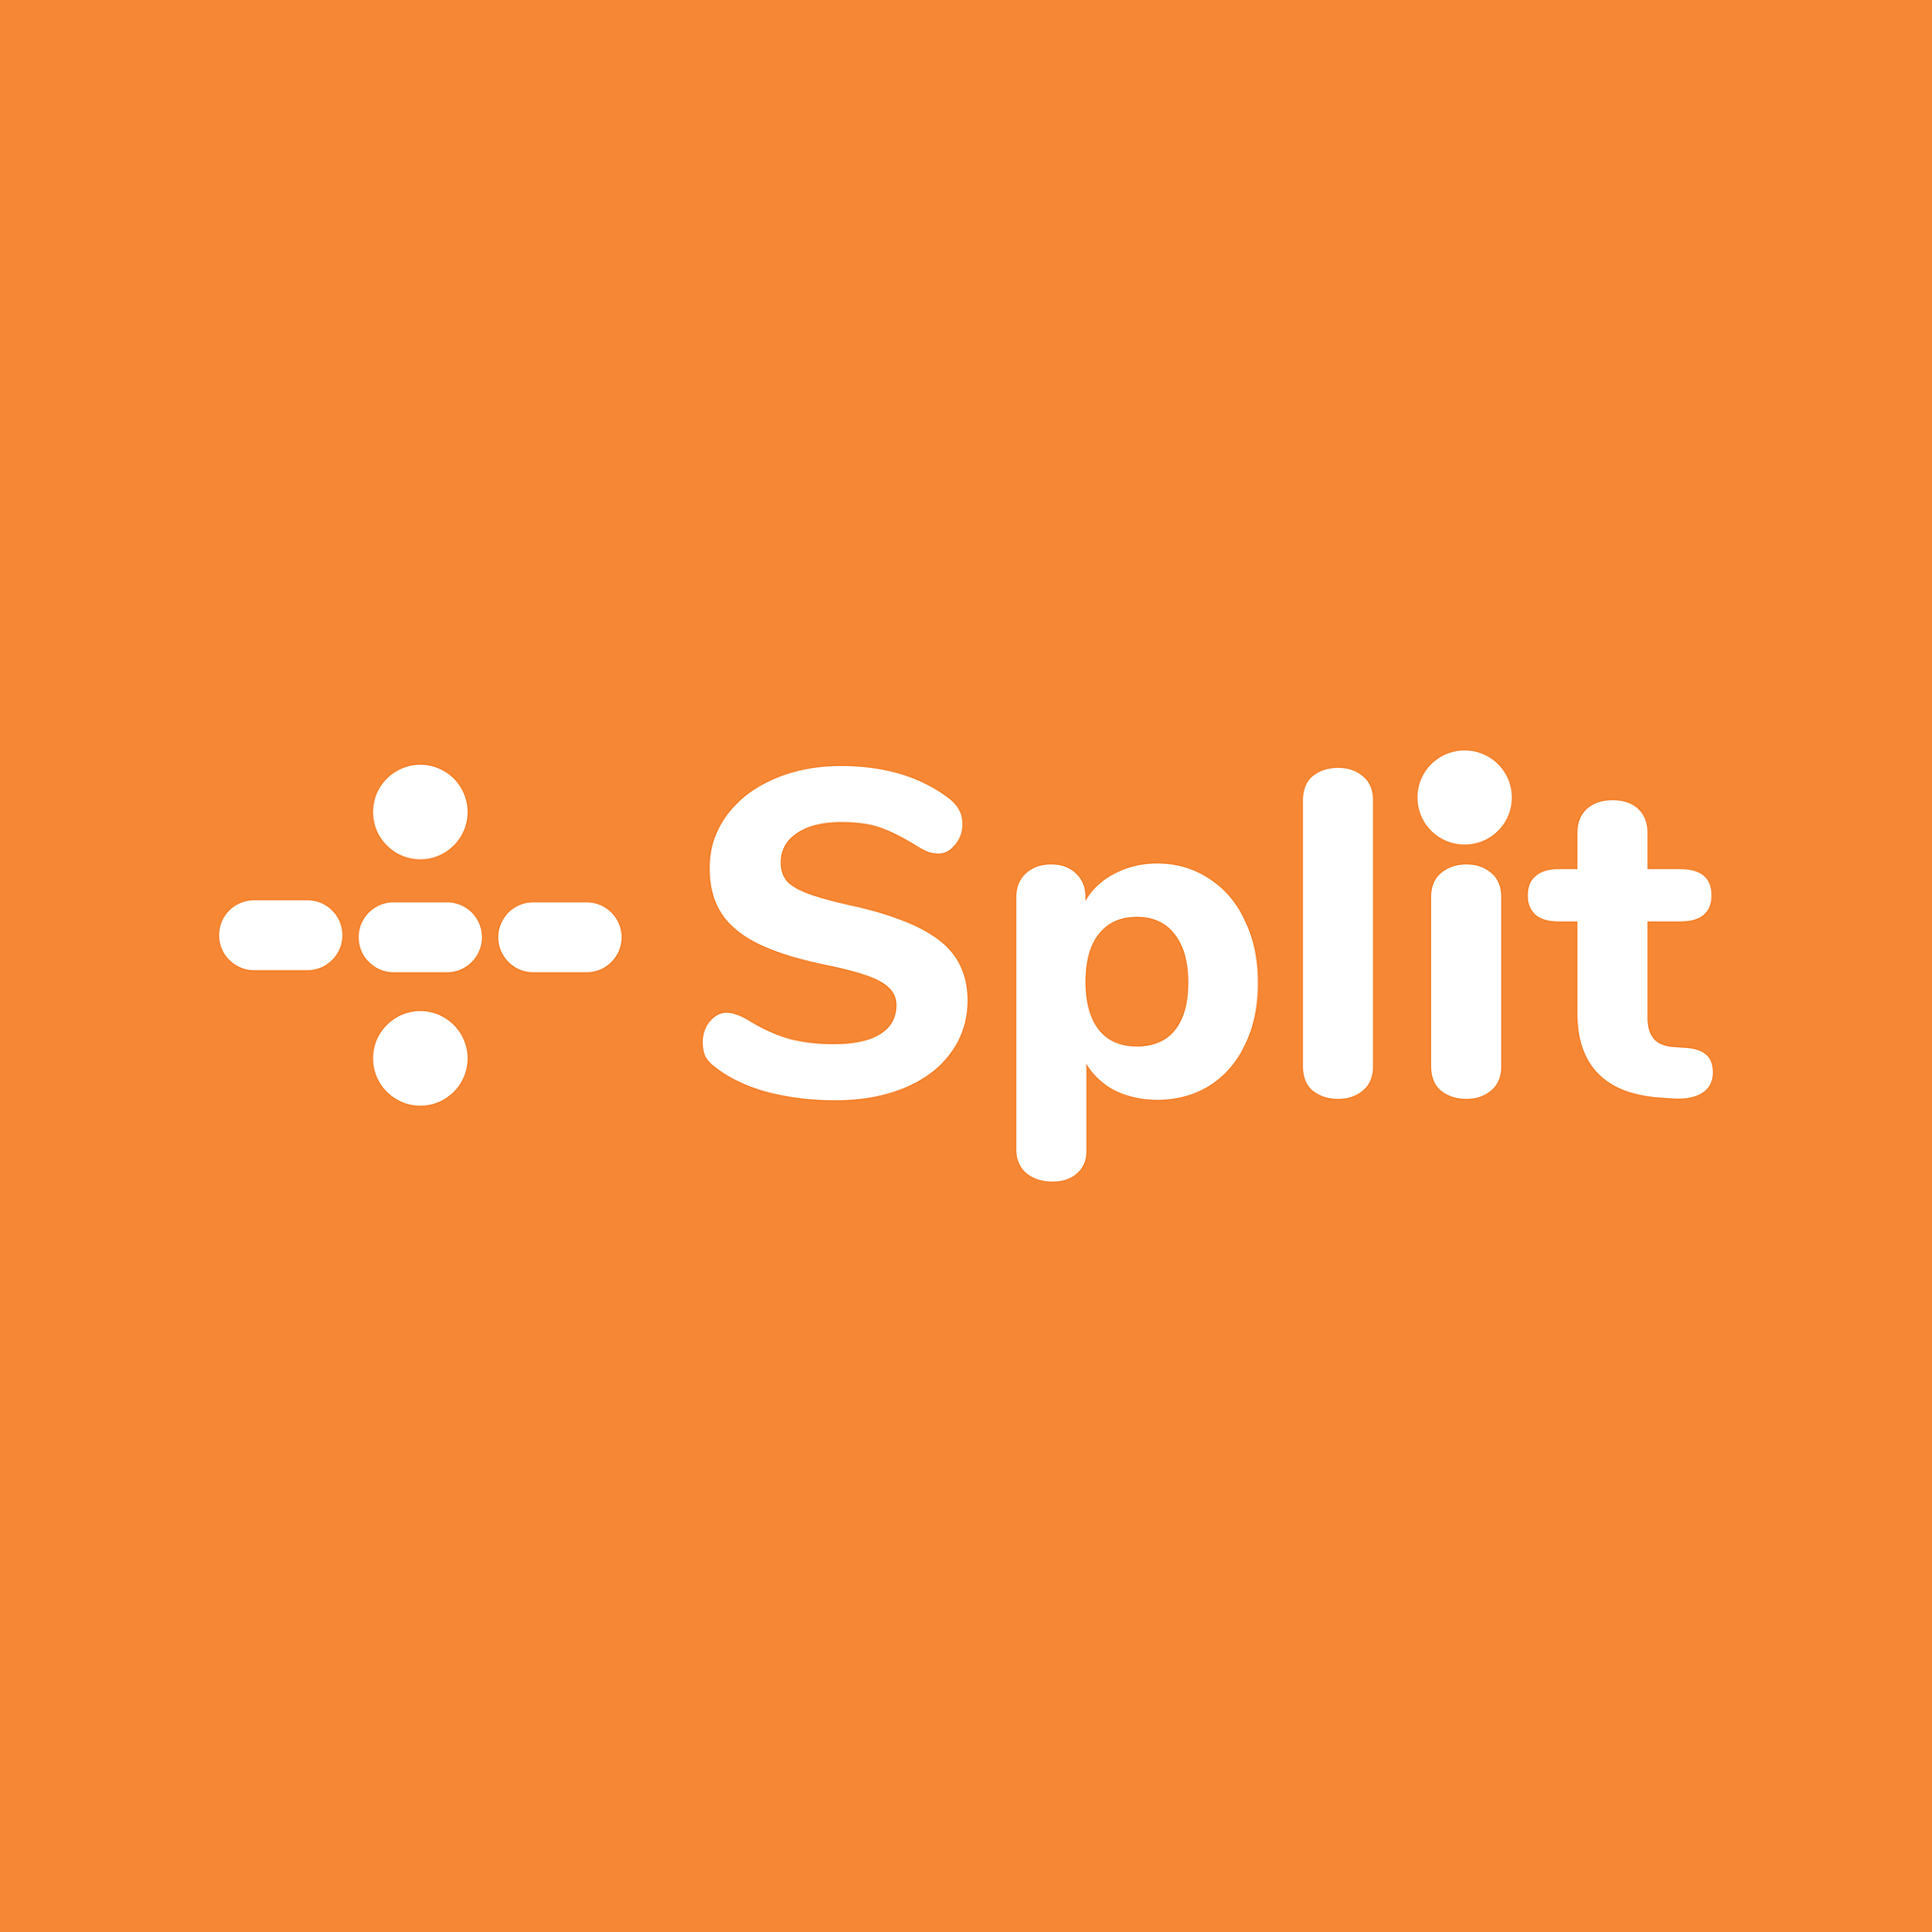 Pay with Split